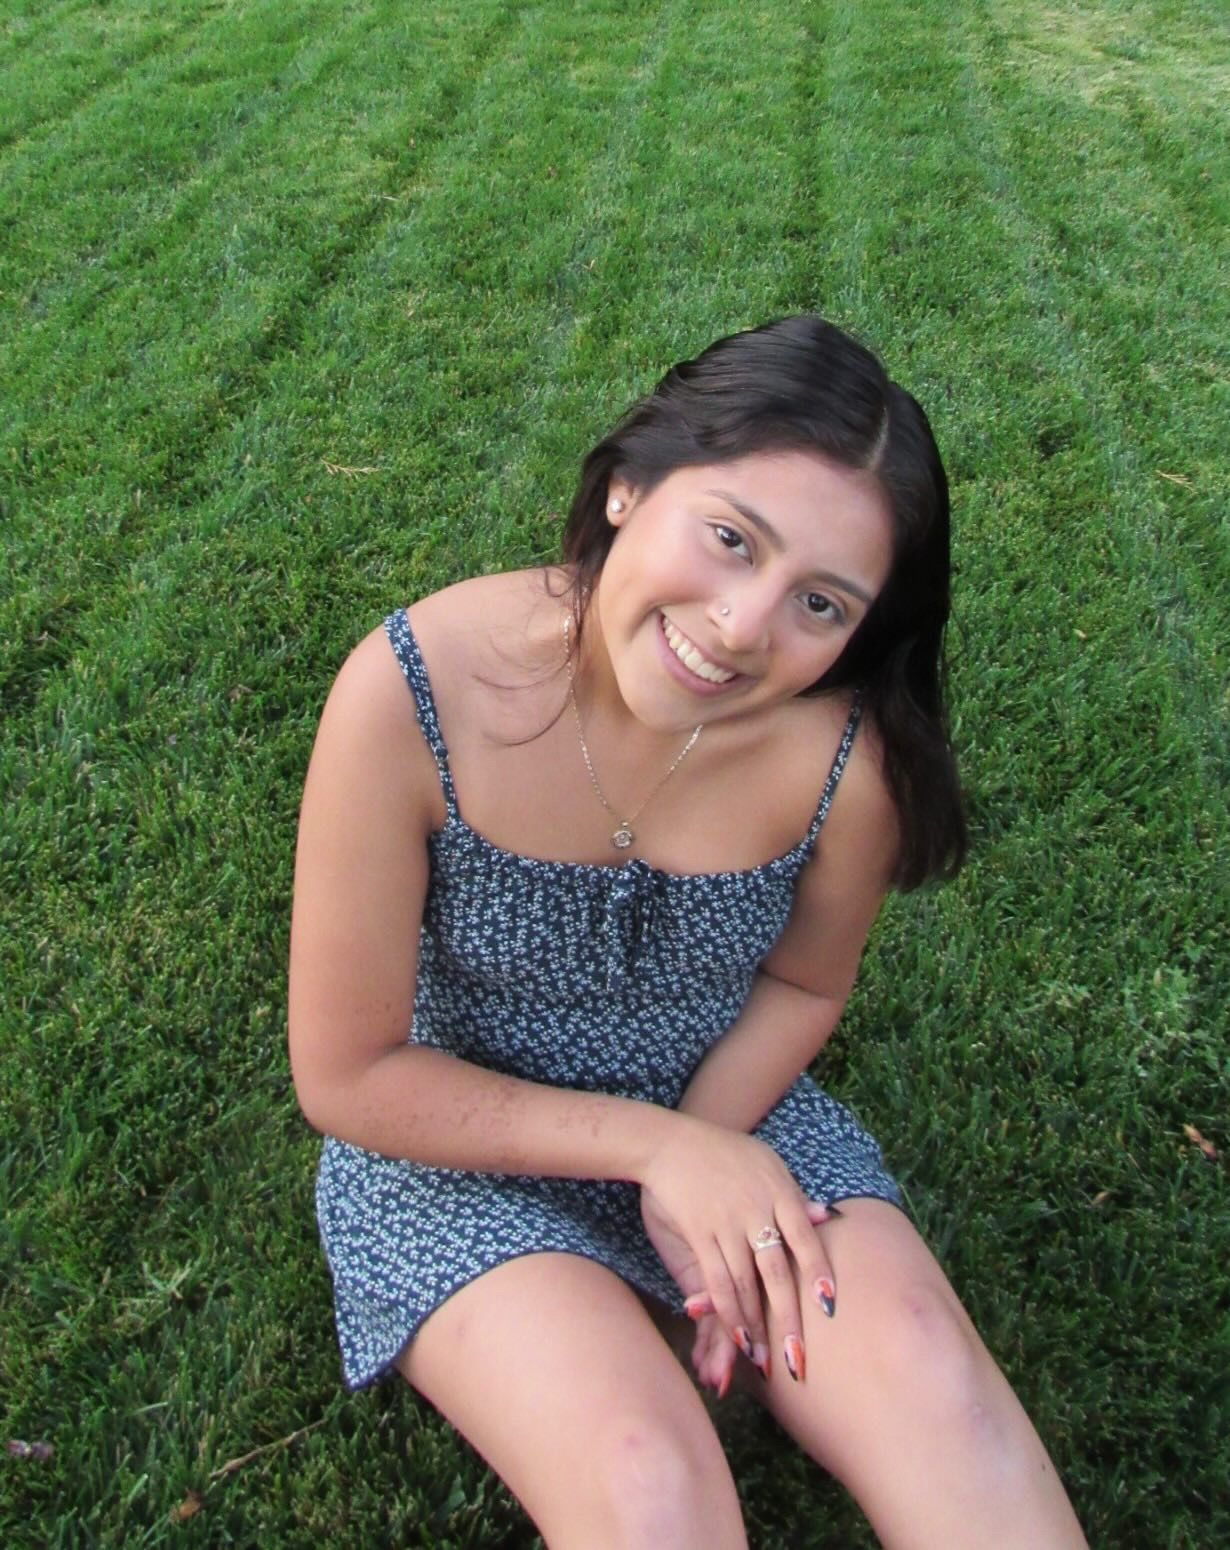 A photo of Emily, who's a student at the University of Oregon, sitting on the grass in a sundress.